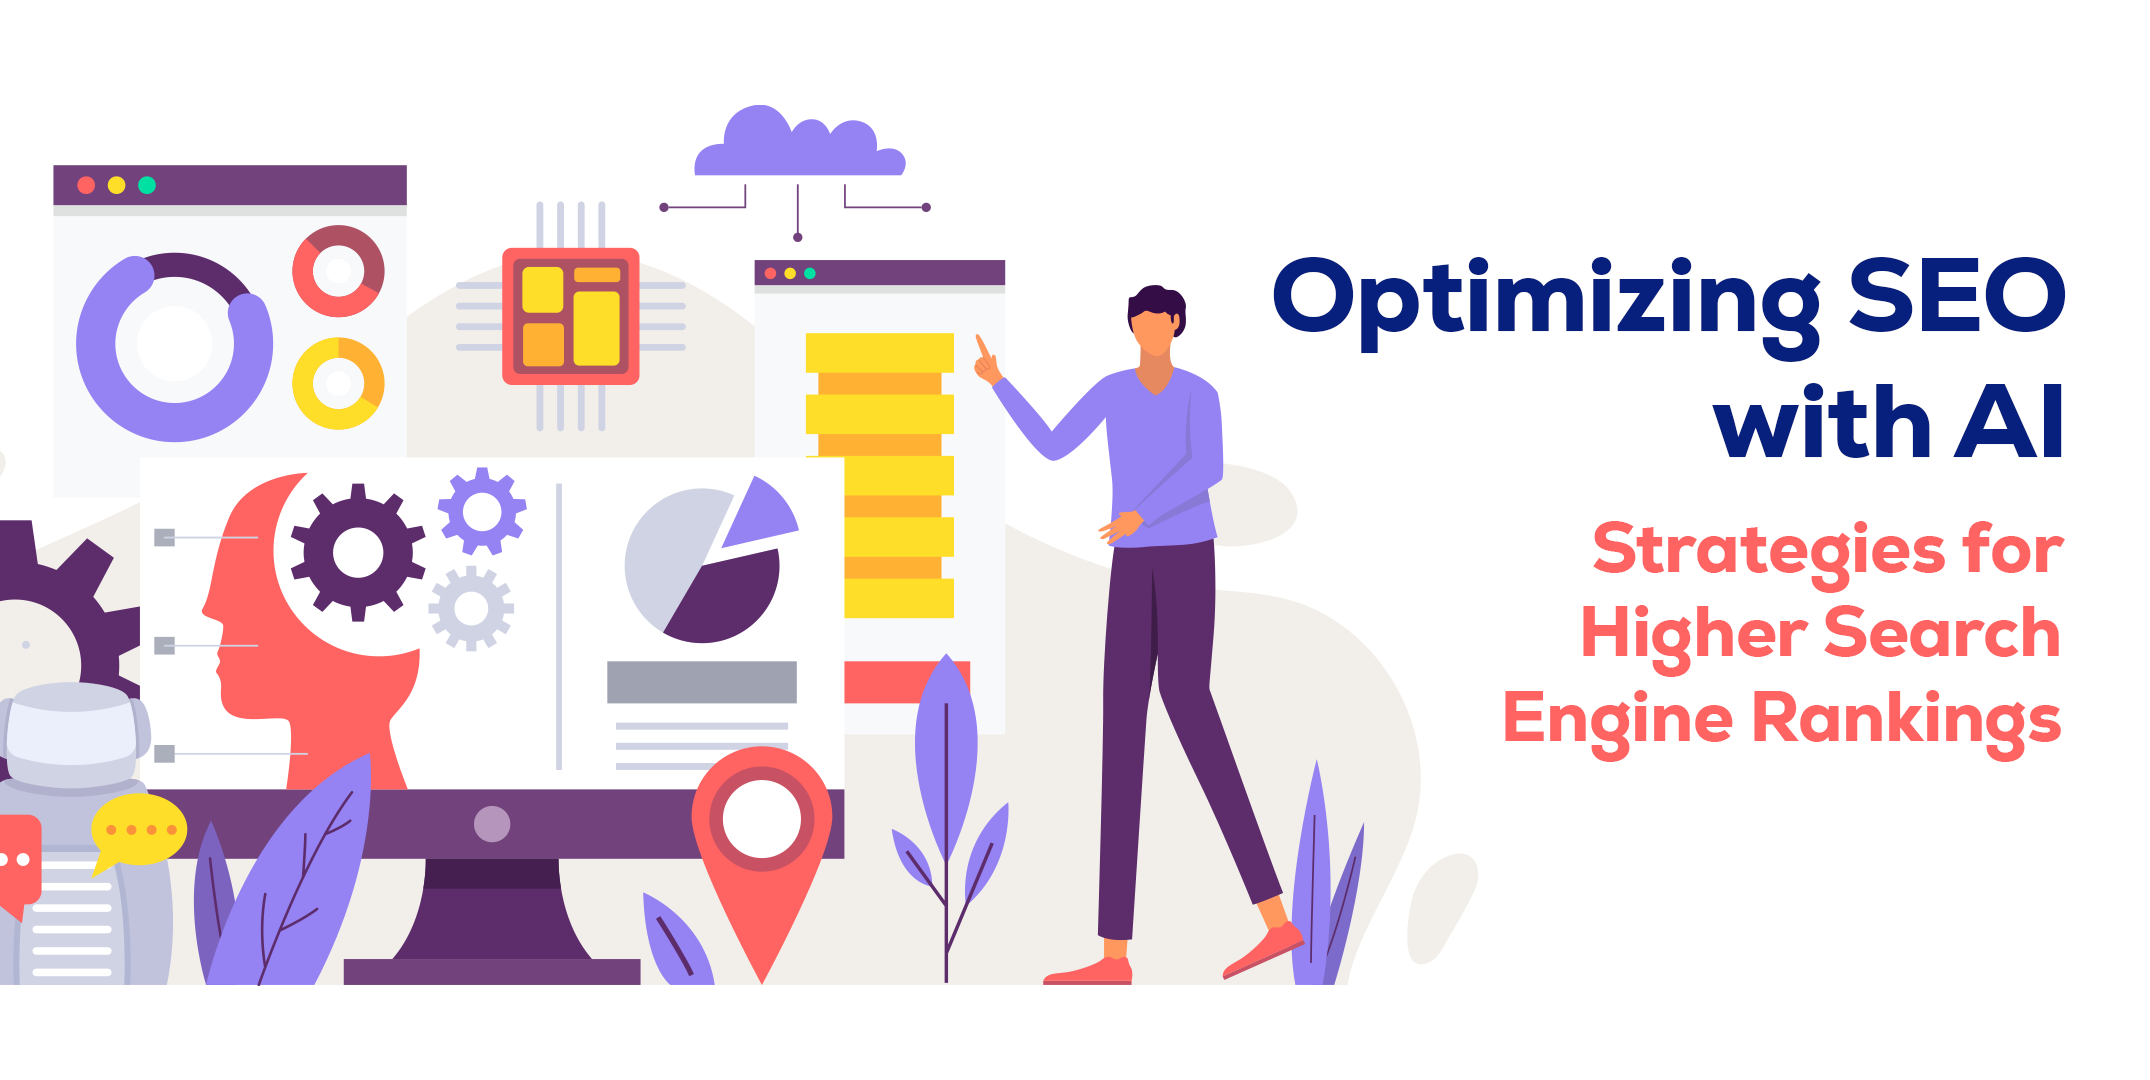  Optimizing SEO with AI: Strategies for Higher Search Engine Rankings